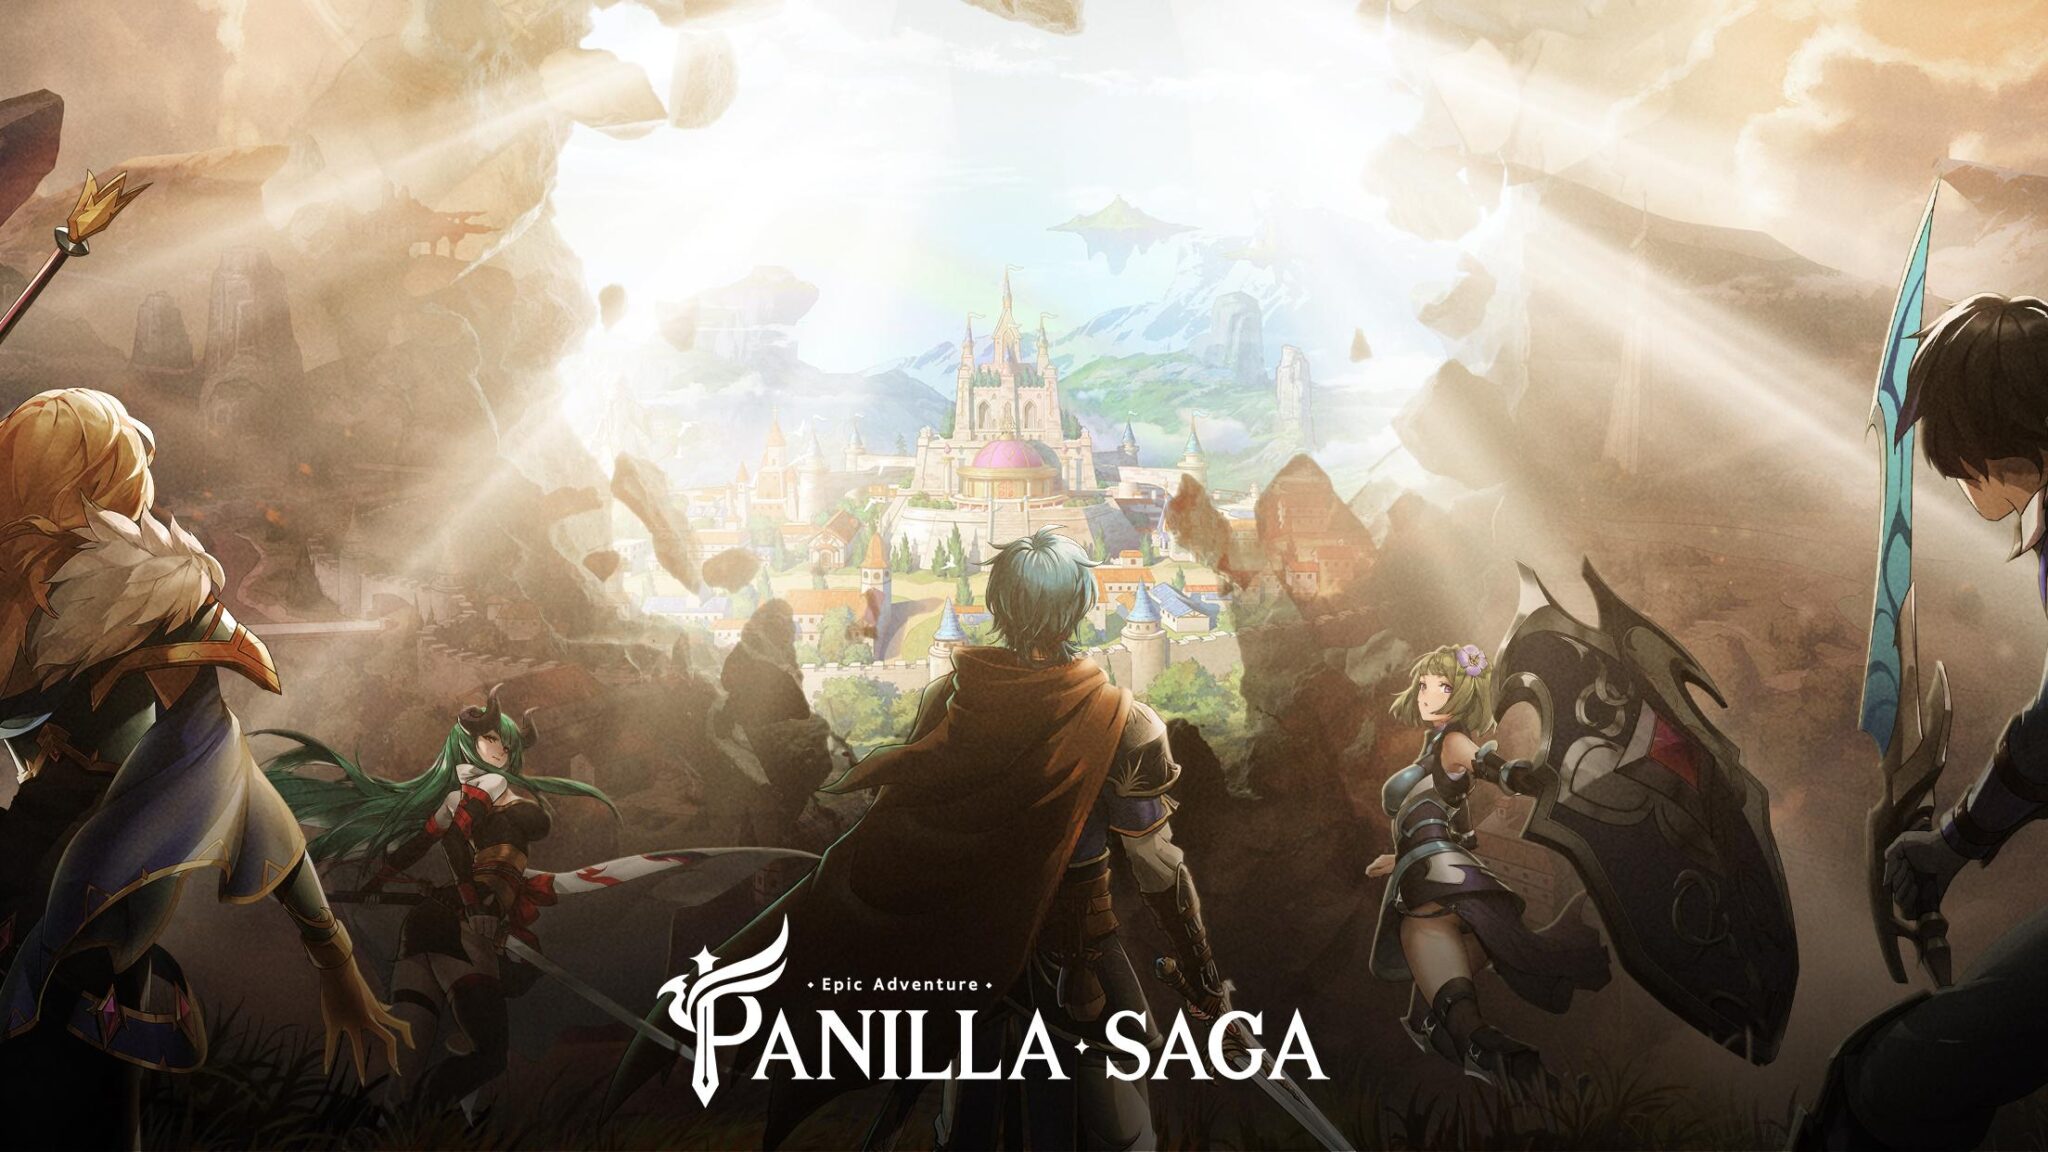 Panilla Saga is now available for pre-registration, a new retro-style IDLE RPG